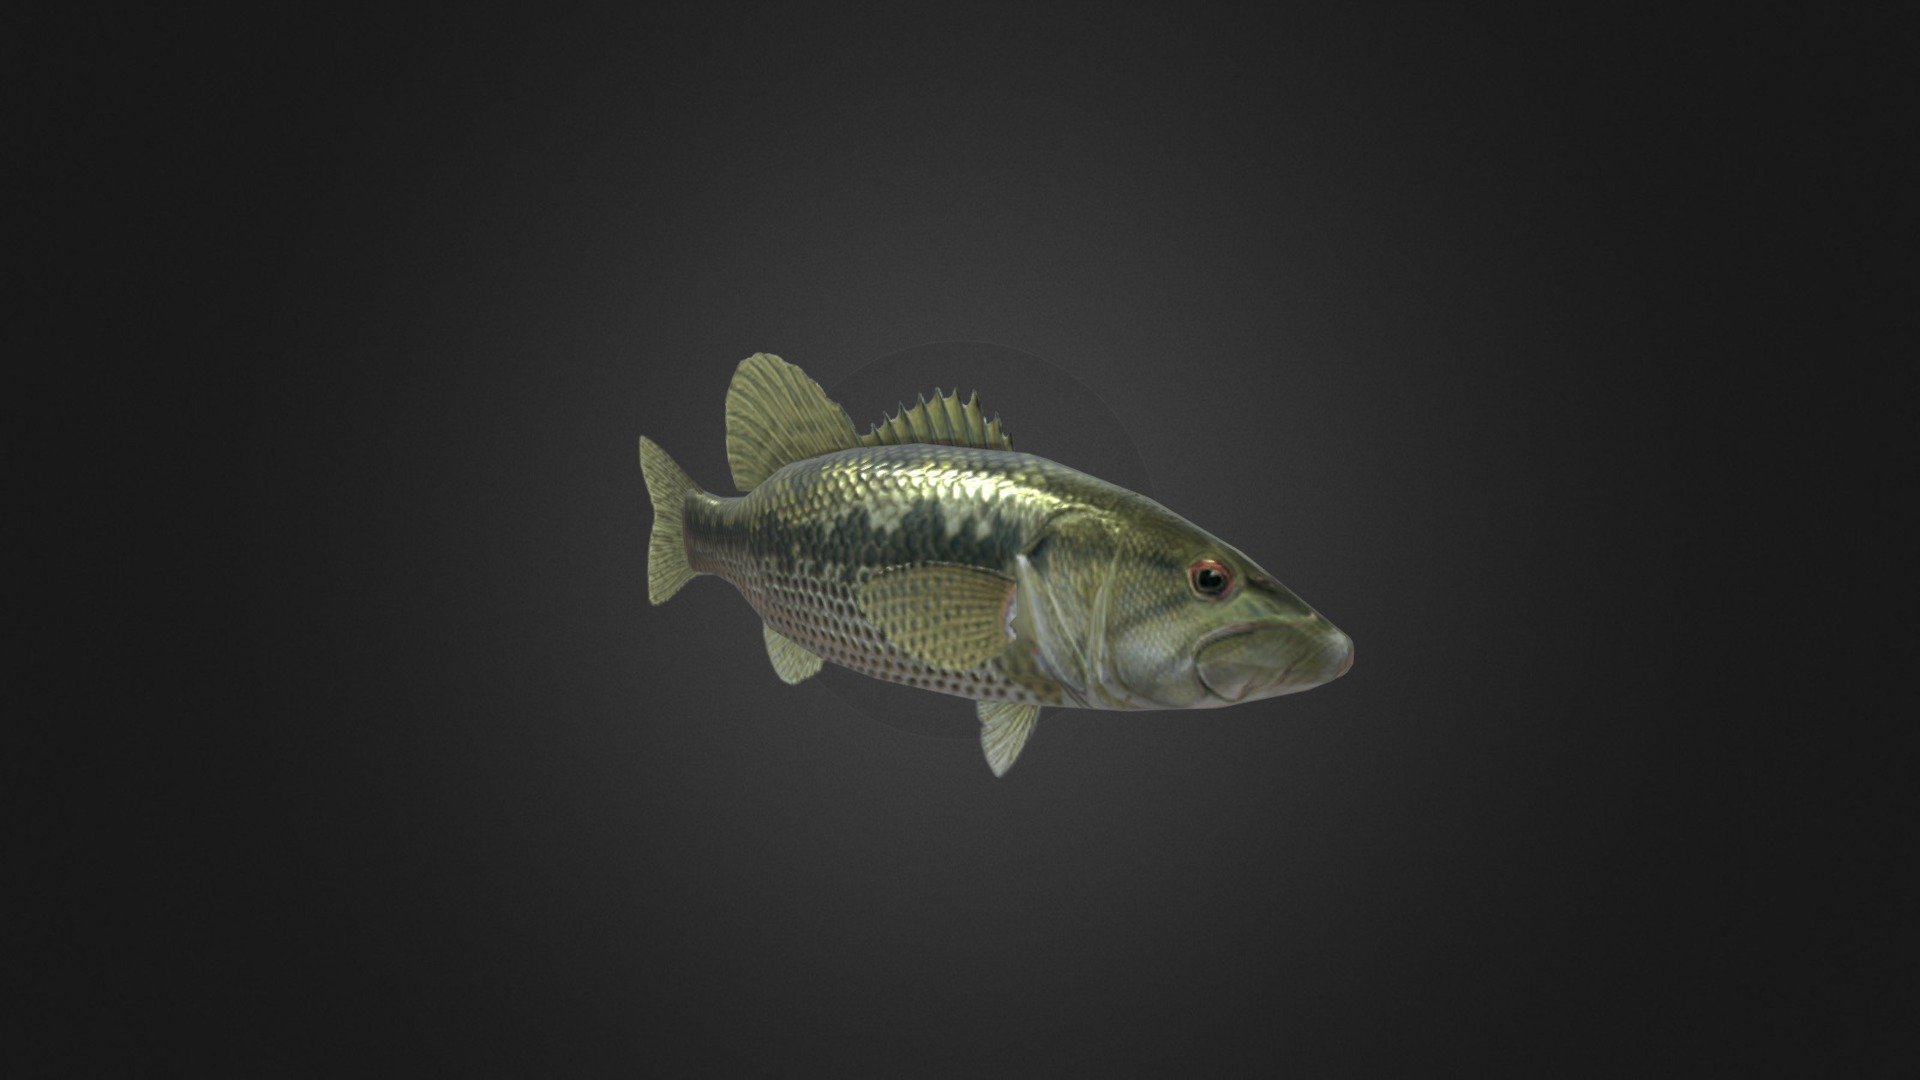 Very low-poly, optimized, simplistic bass model. Perfect for far/small views or using as a flock by duplicating the model or in 3D particle systems or for use on mobile games.
The model is rigged and weighed properly, ready to be animated using your software of preference. (The model does not contain animations; only rigging.)

Includes FBX, blend and collada formats, ambient occlusion and normal maps, and .psd files of the texture maps in case you wish to edit anything.

If you're having trouble importing it, check out my quick, simple step-by-step guides!


Unreal Engine 
Unity
Guide for Godot coming soon.

If you have any issues, questions or suggestions, feel free to send them at quimeliqolakorps@gmail.com! - Low-poly Bass - Buy Royalty Free 3D model by Lesen (@lance64) 3d model